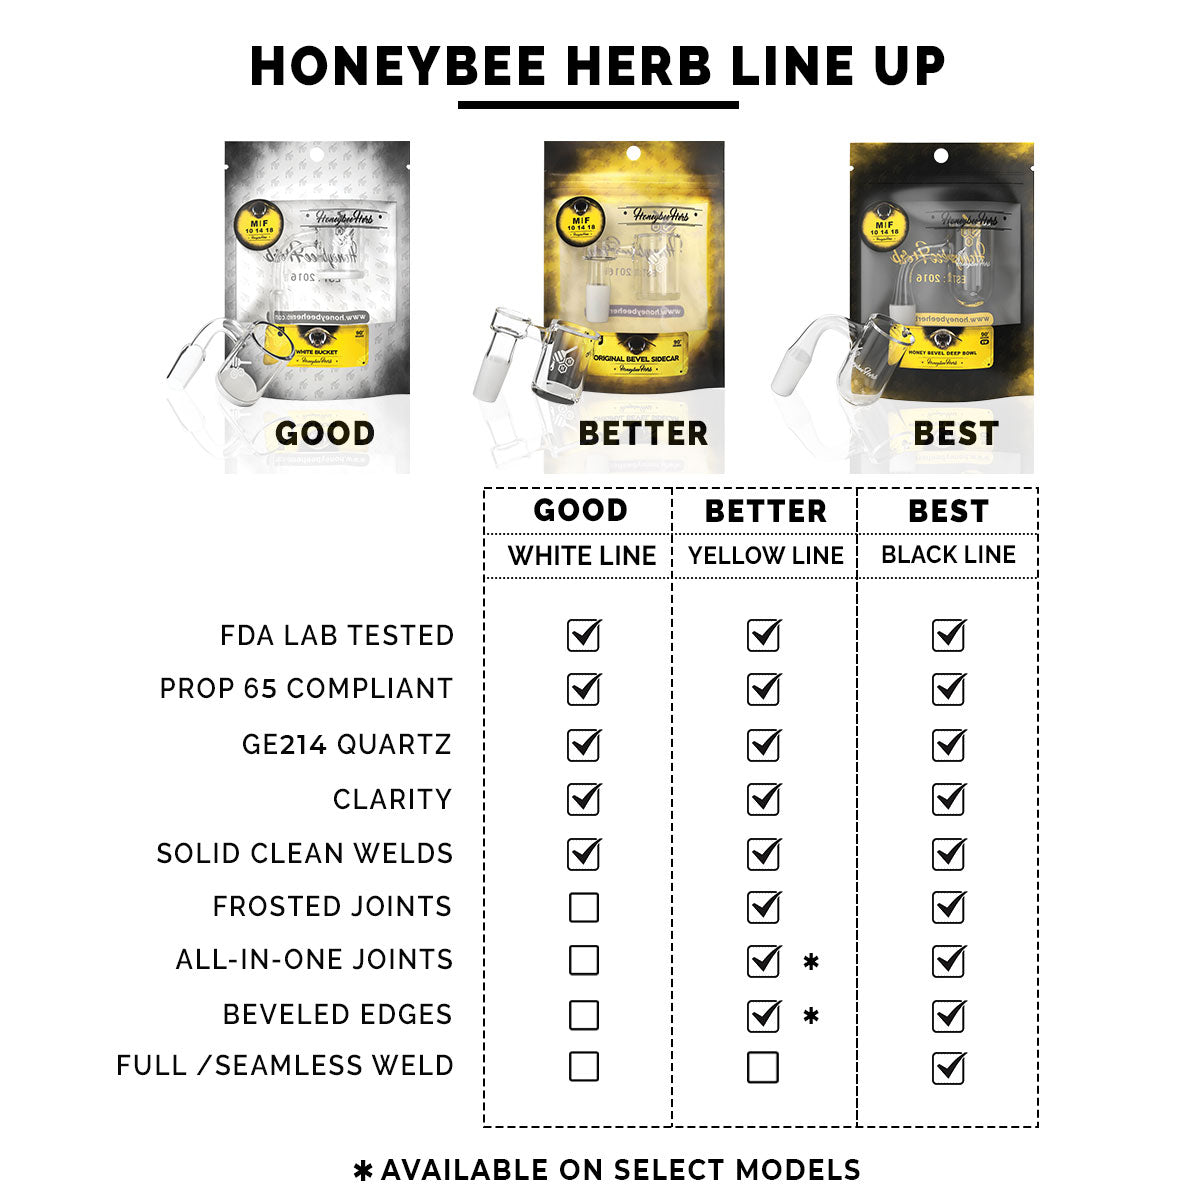 Honeybee Herb line up chart comparing features of quartz bangers on a white background